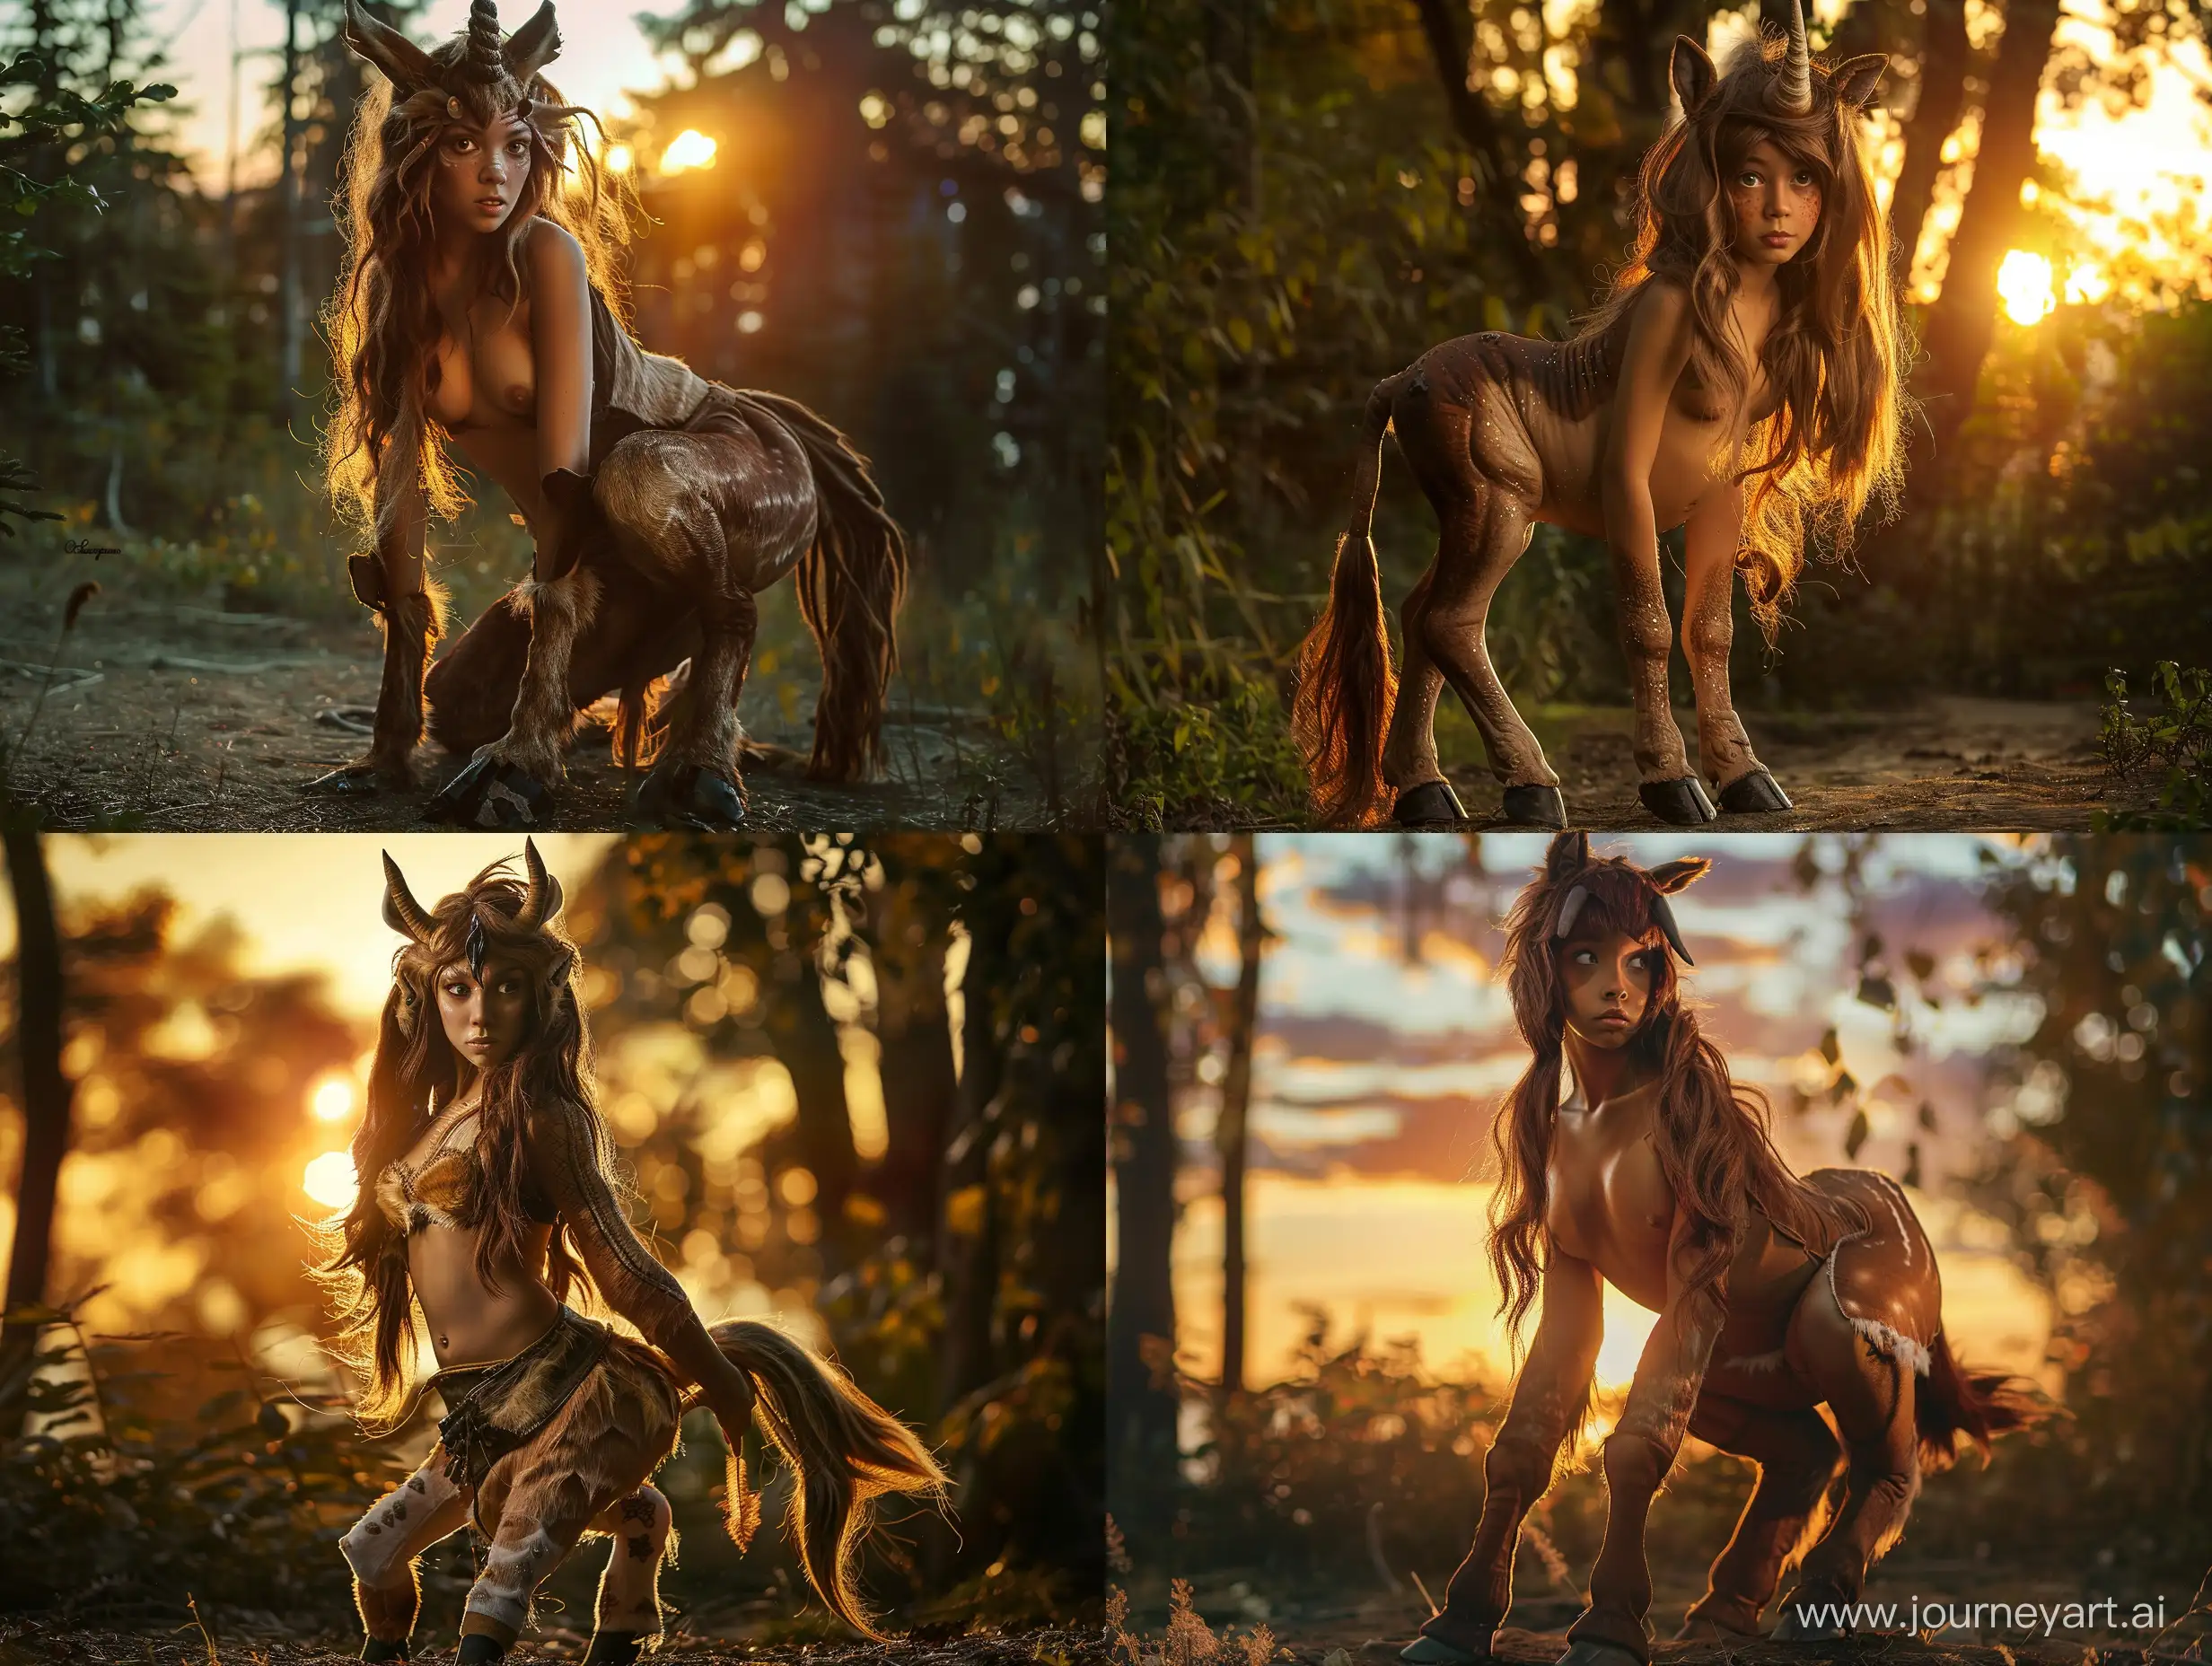 A photograph of a centaur. She has loose brown hair, a face and a chest. She has hooves, fur and a tail. She is standing on all fours in a forest at sunset. Full body picture